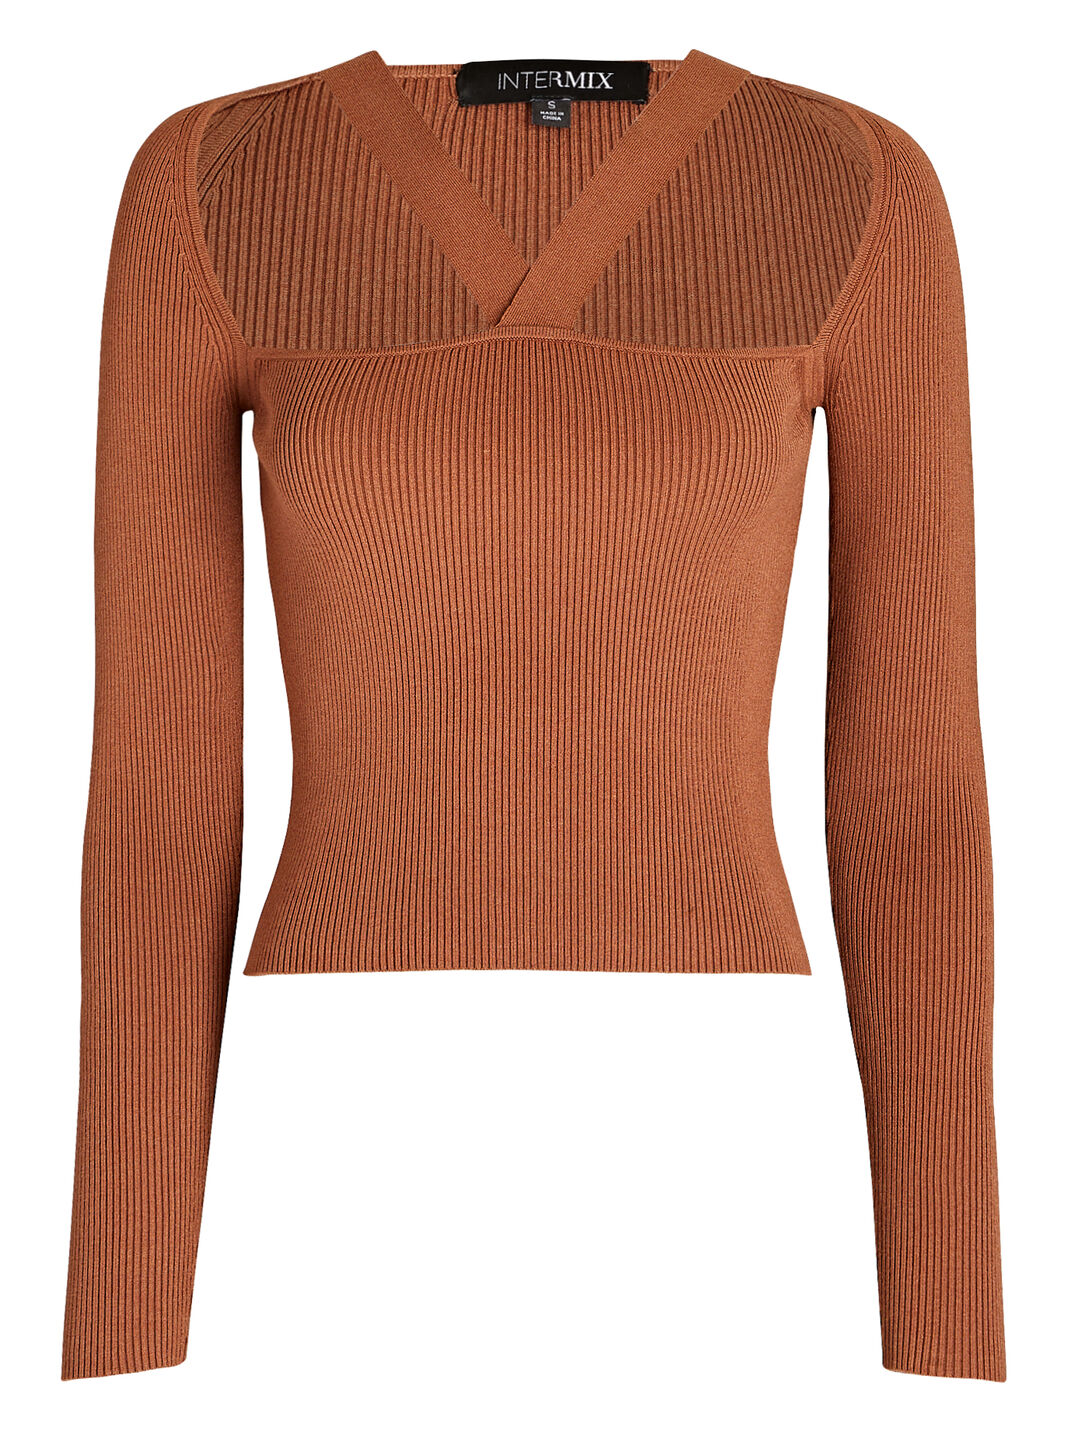 Naria Cut-Out Knit Sweater